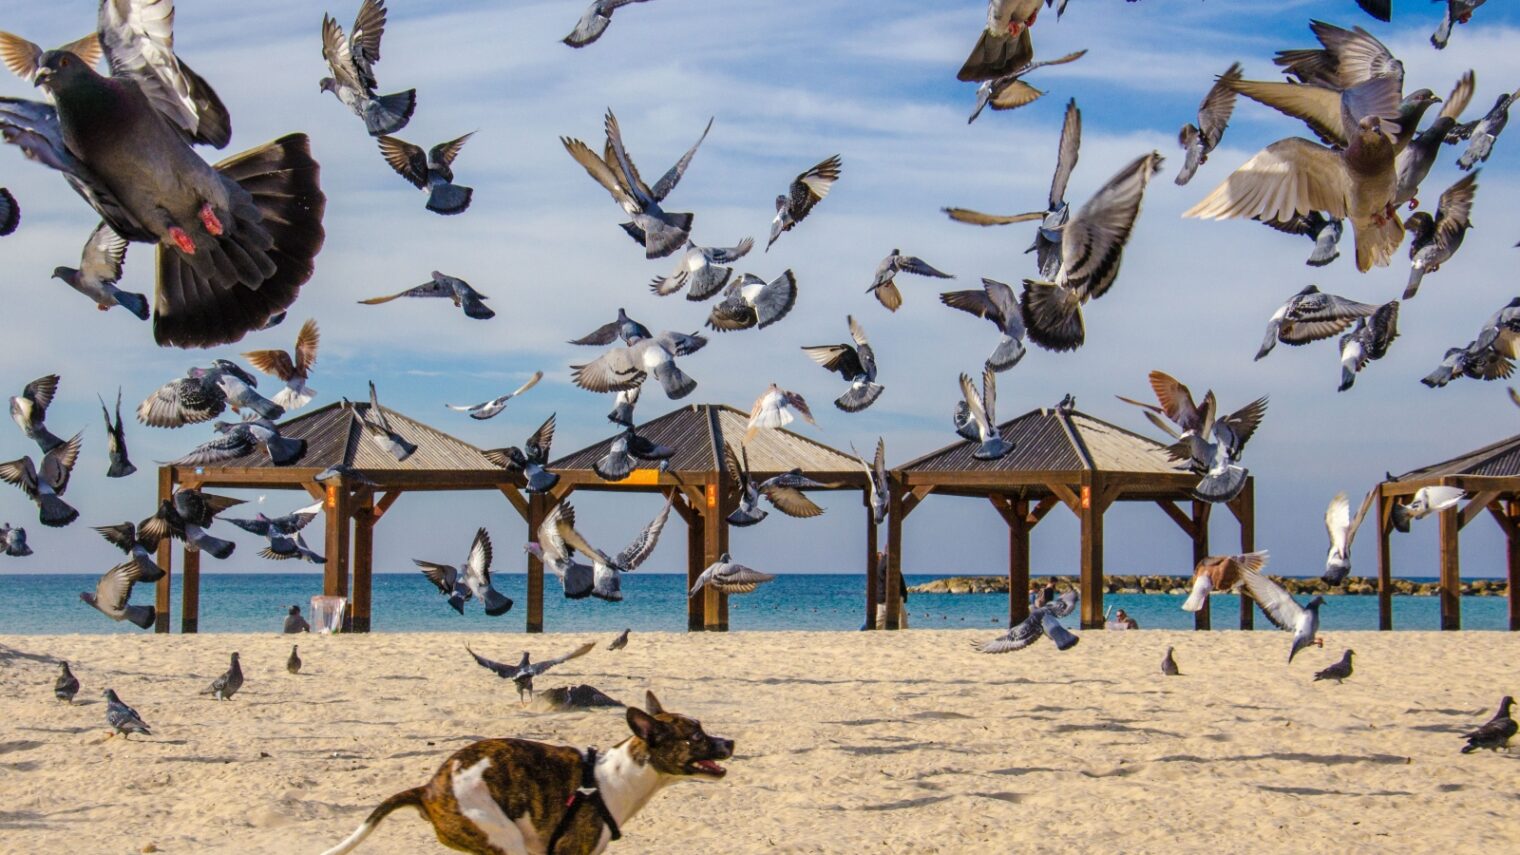 This photo of birds and a dog on a Tel Aviv beach is one of Niv Glazman’s most popular.